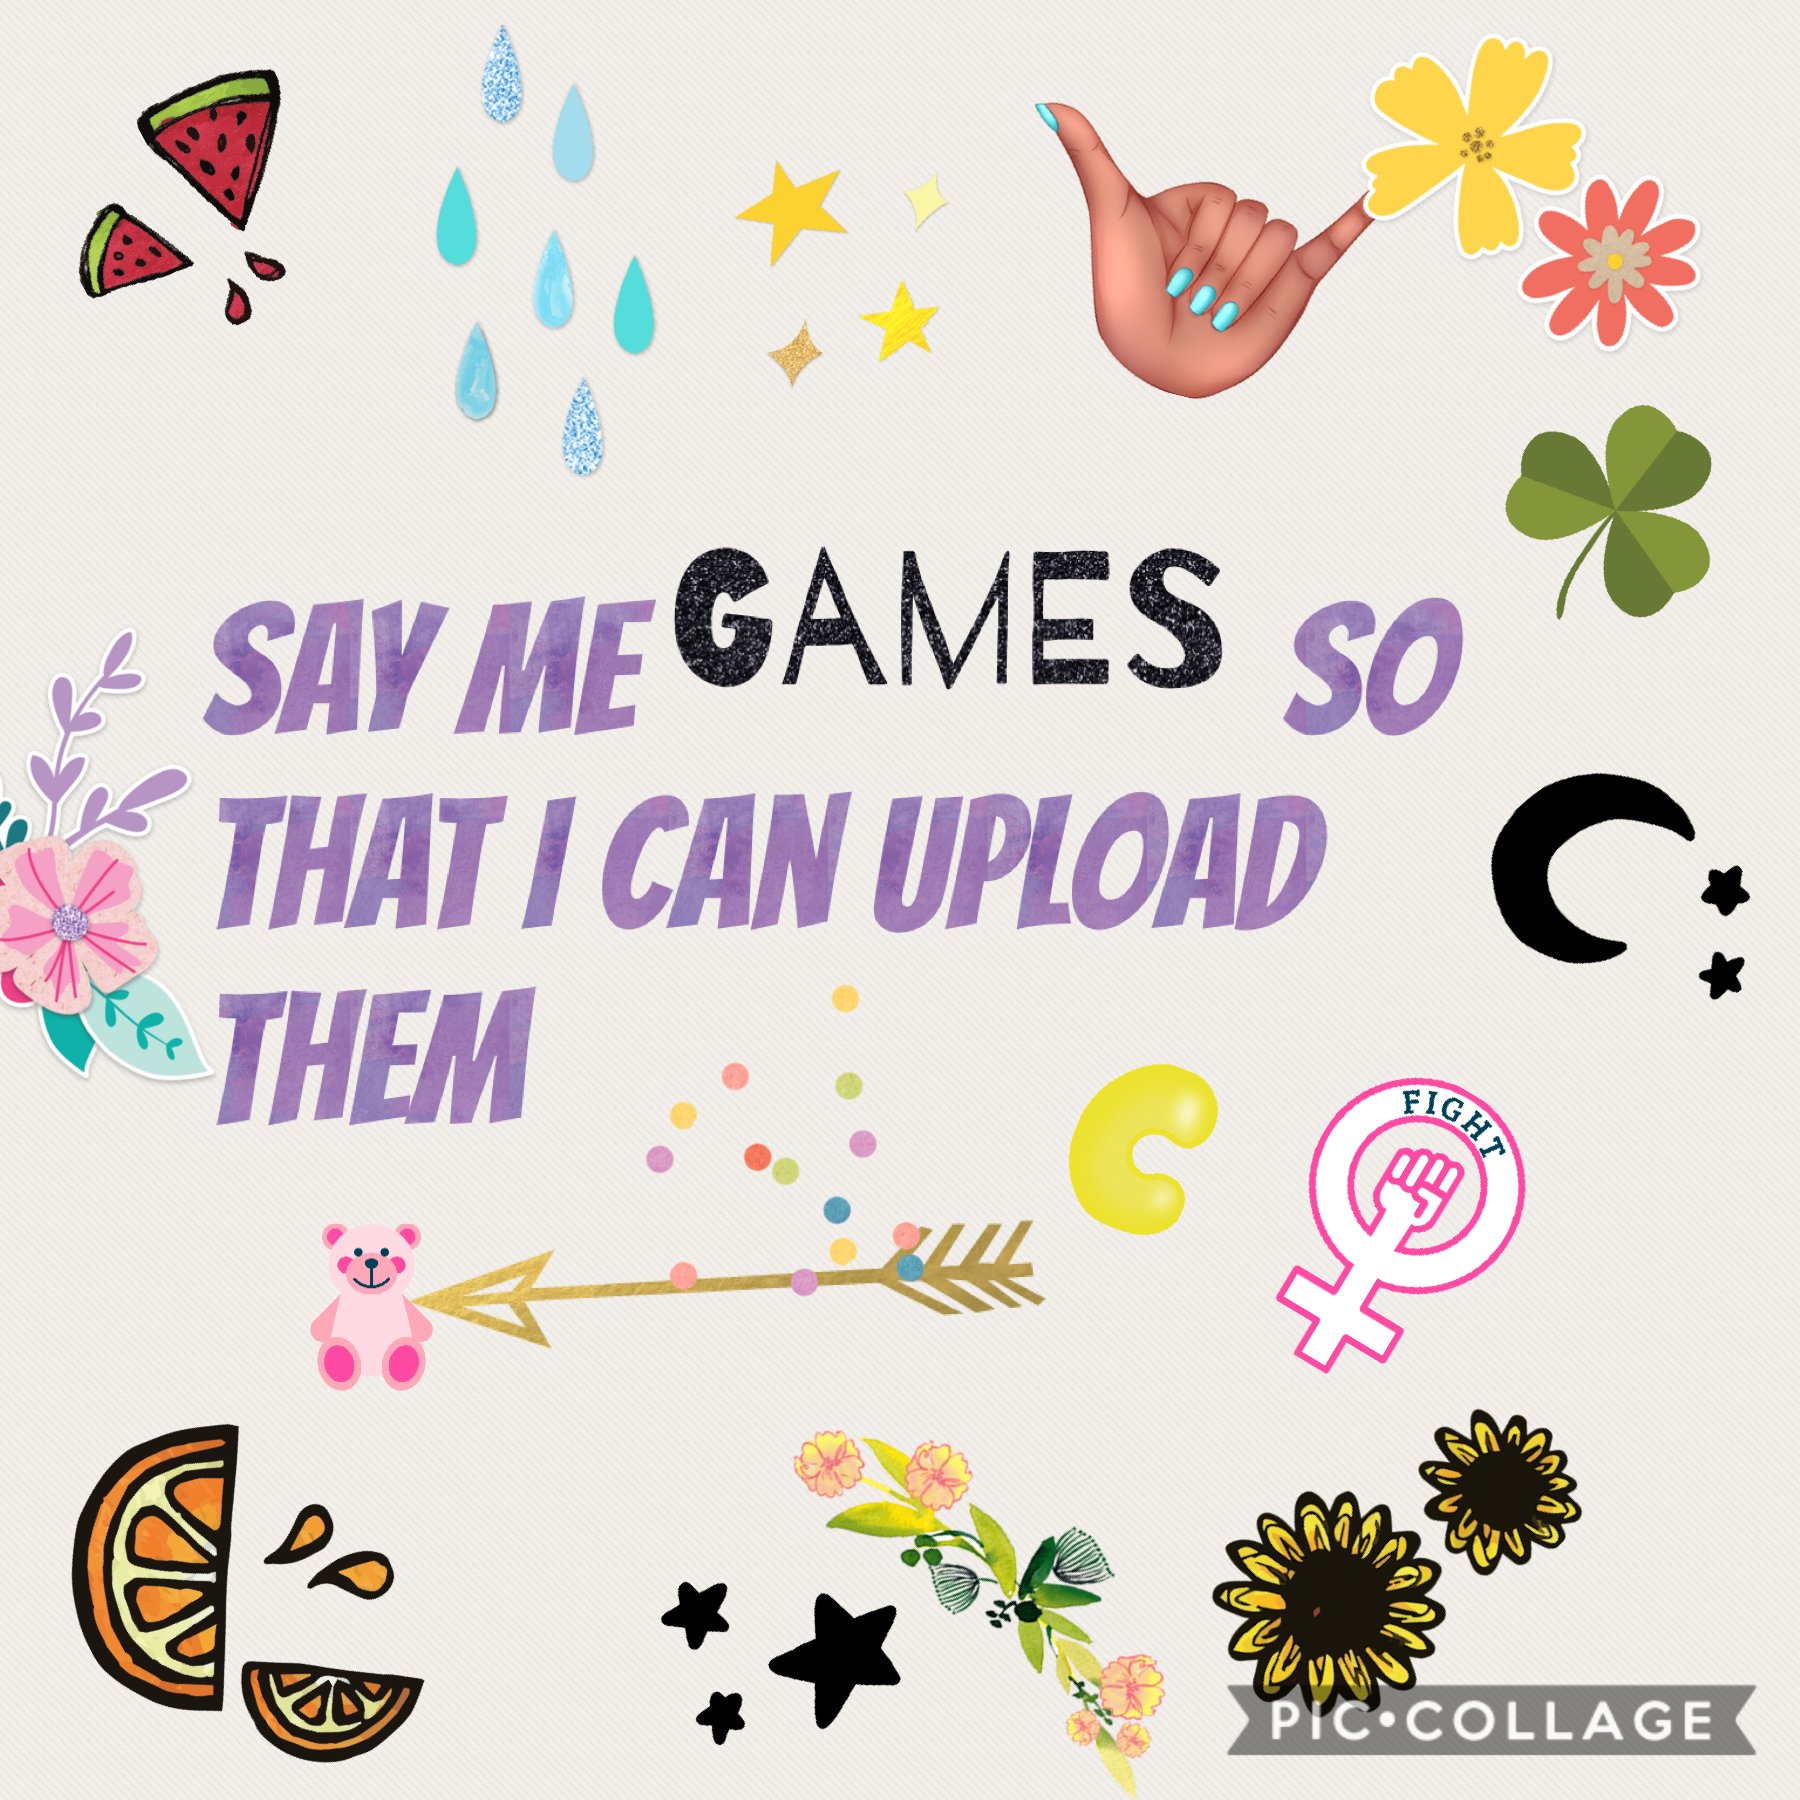 Tap
Can you say me games to upload
Please!!!!!!!!!!!!!!!!!!!!!!!!

ʕ•ᴥ•ʔ